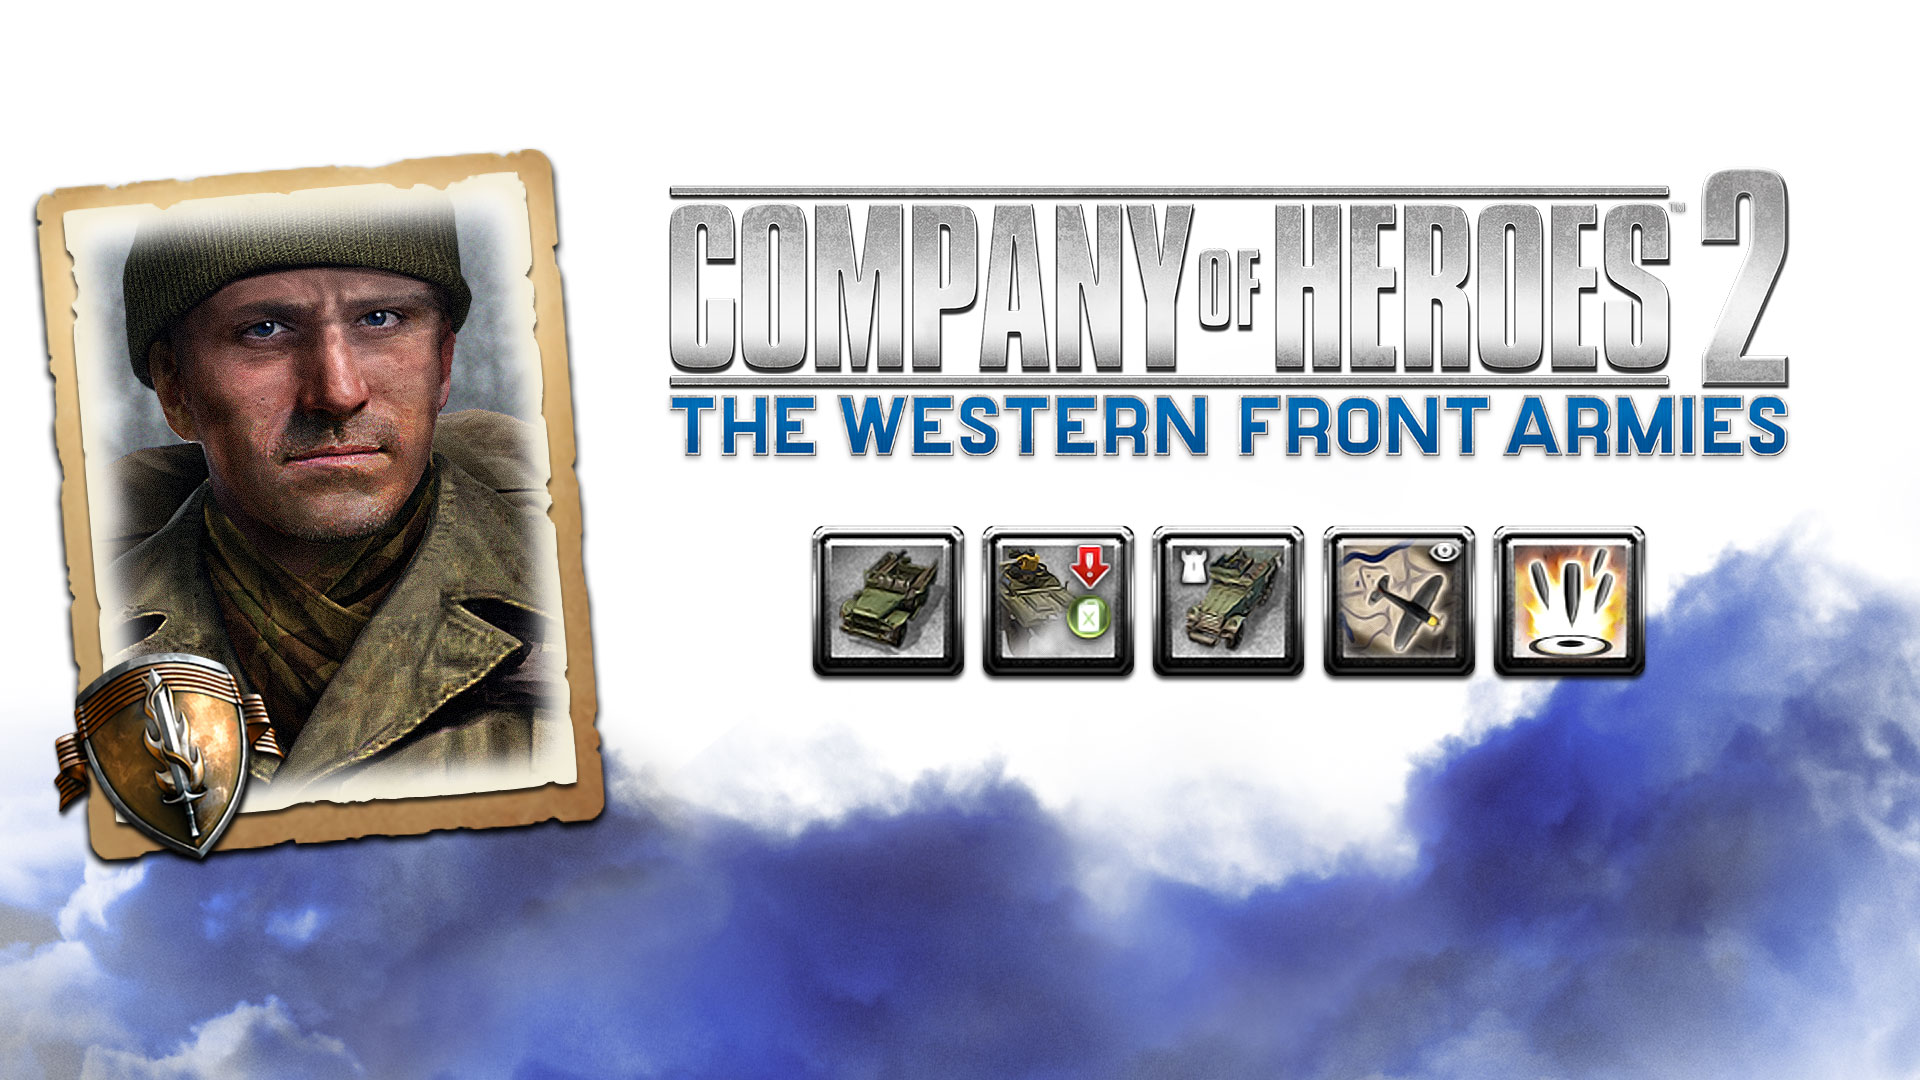 [$ 4.17] Company of Heroes 2 - US Forces Commanders Collection DLC Steam CD Key